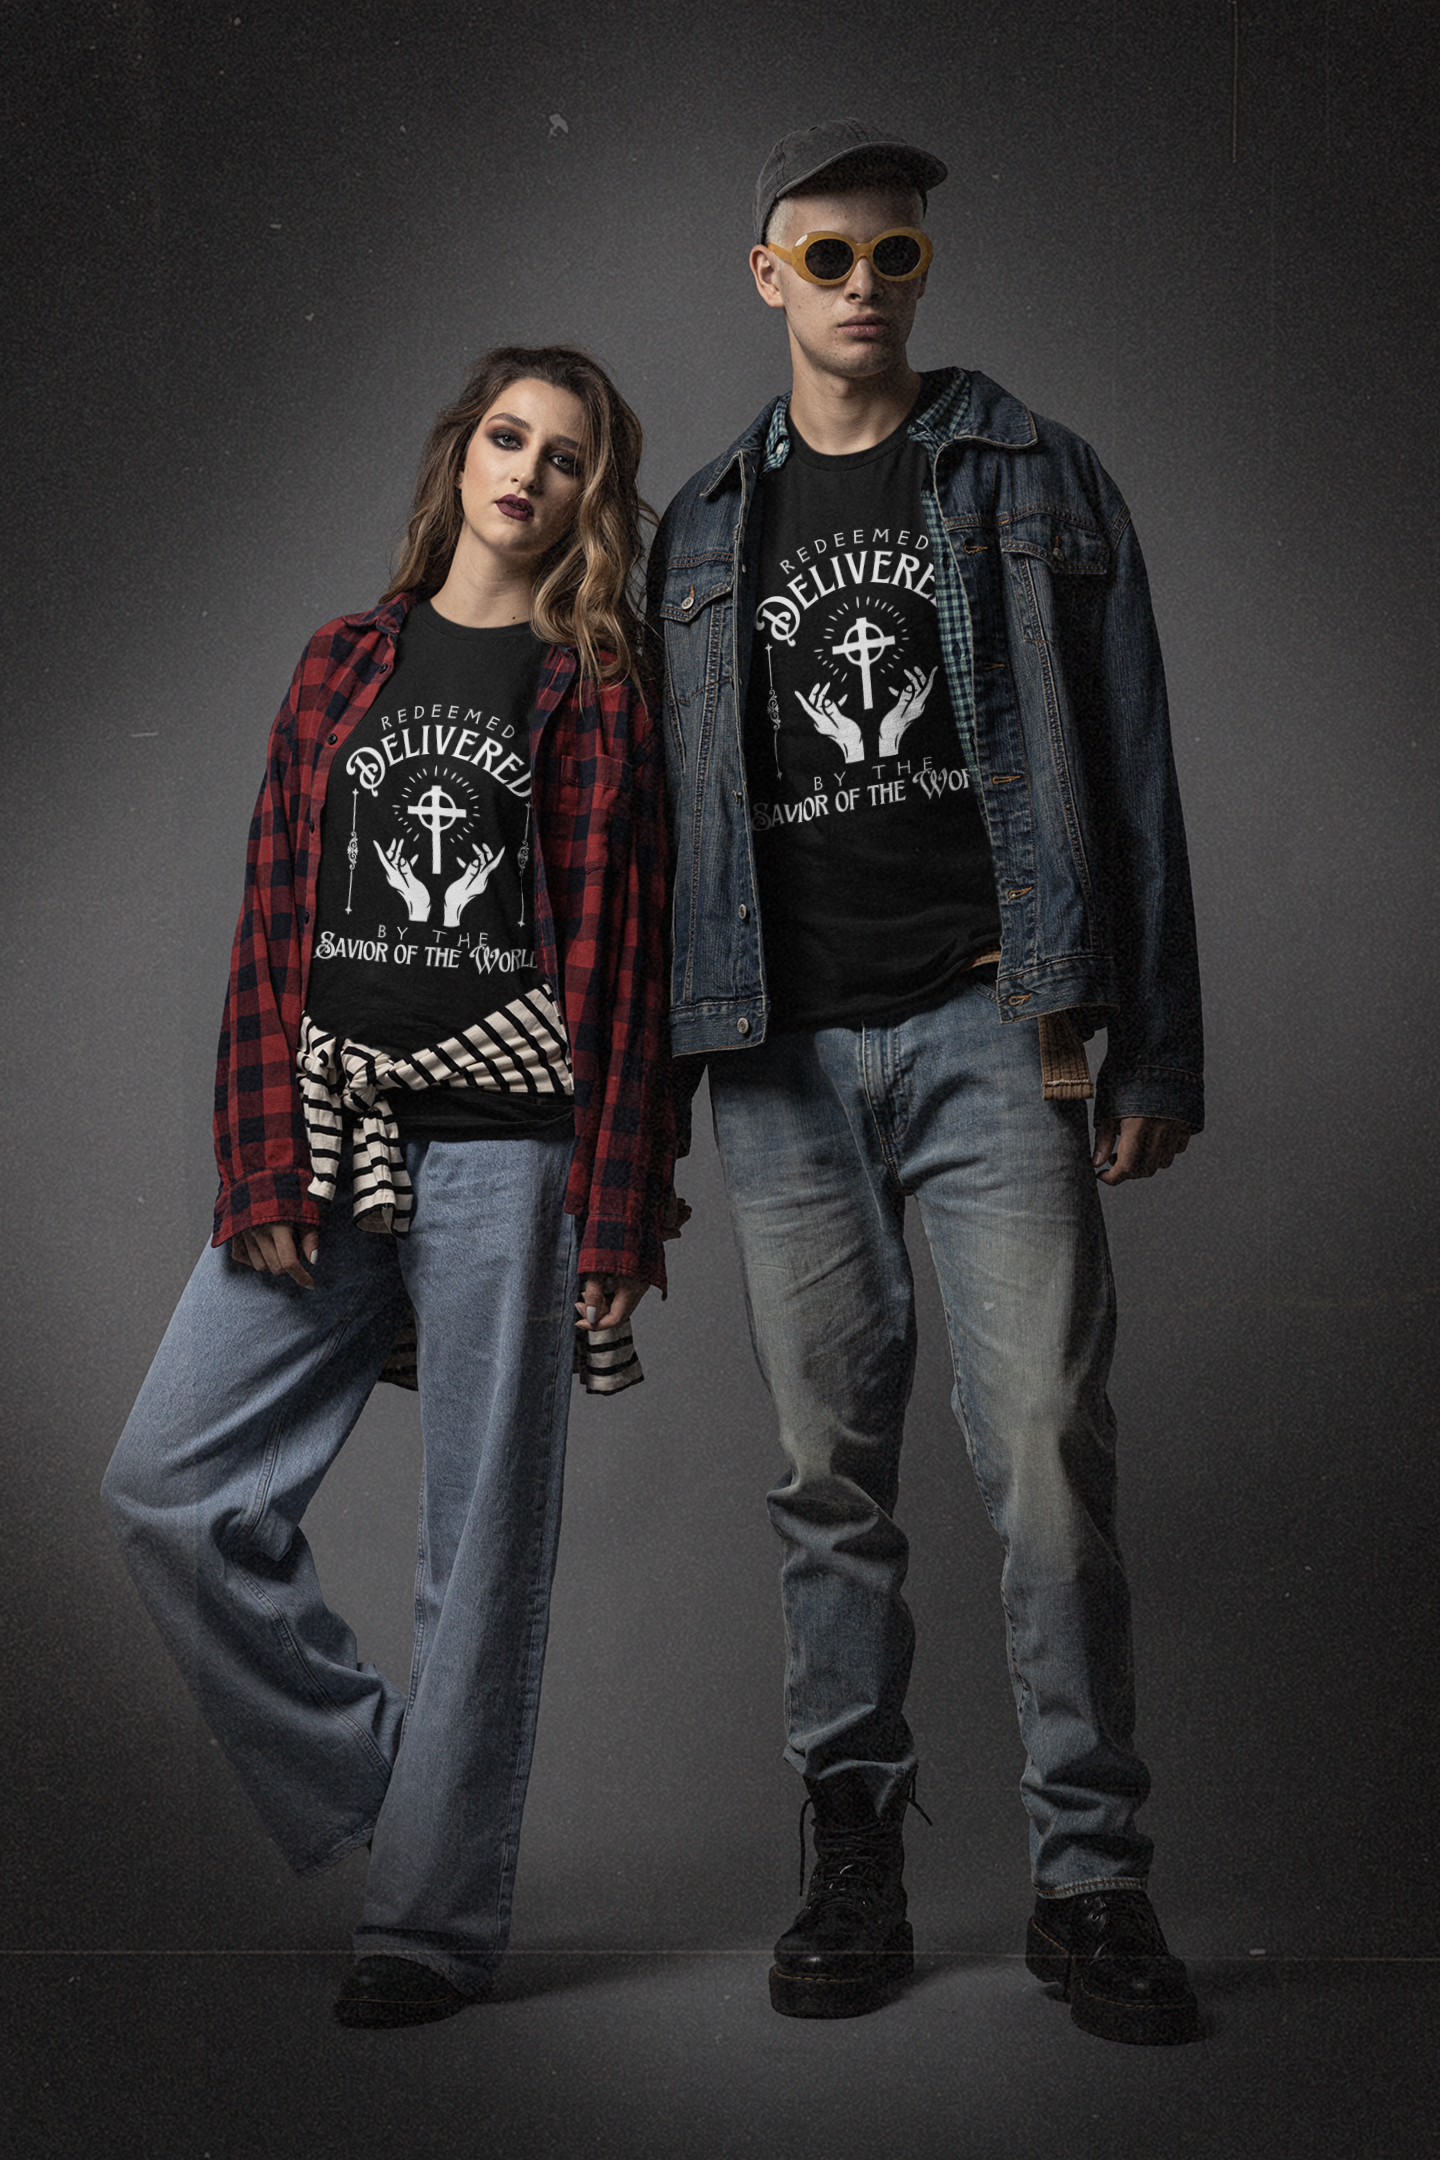 Redeemed and Delivered Christian Grunge Shirt Unisex Mens Womens